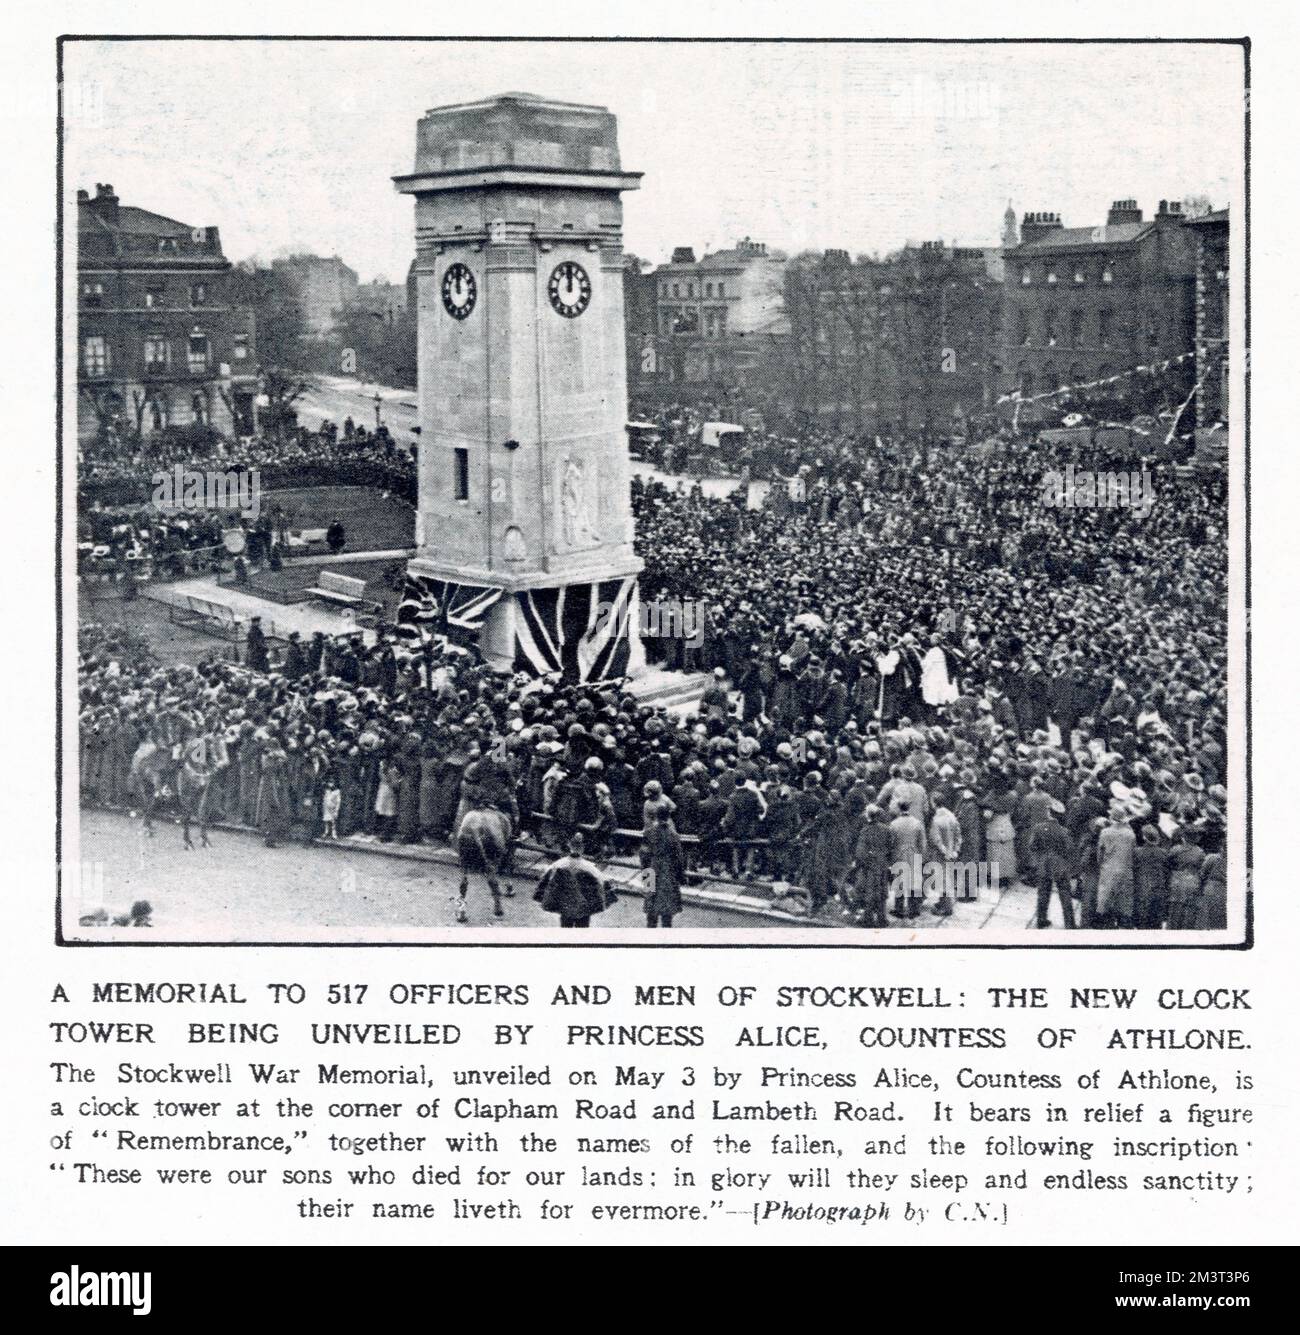 A clock tower - built as a memorial to the 517 officers and men killed in the First World War - opened in Stockwell, south London by Princess Alice, Countess of Athlone. Stock Photo